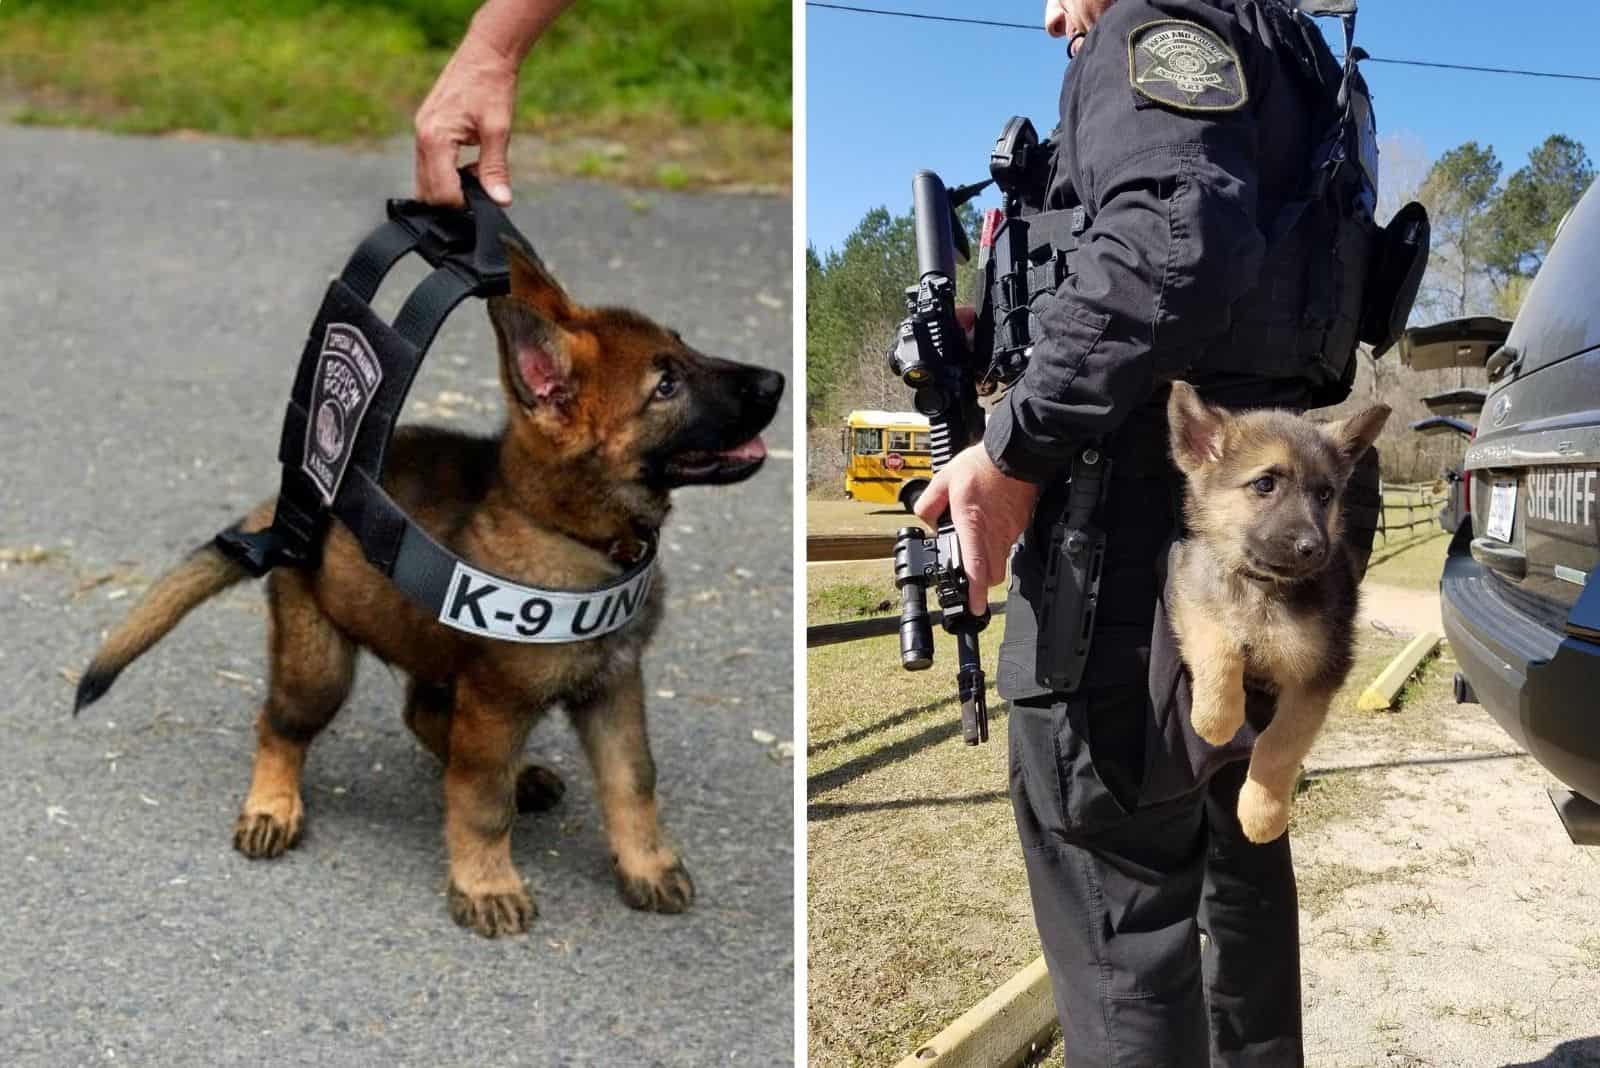 19 Adorable K-9 Puppies In Training For Pup Patrol Duty